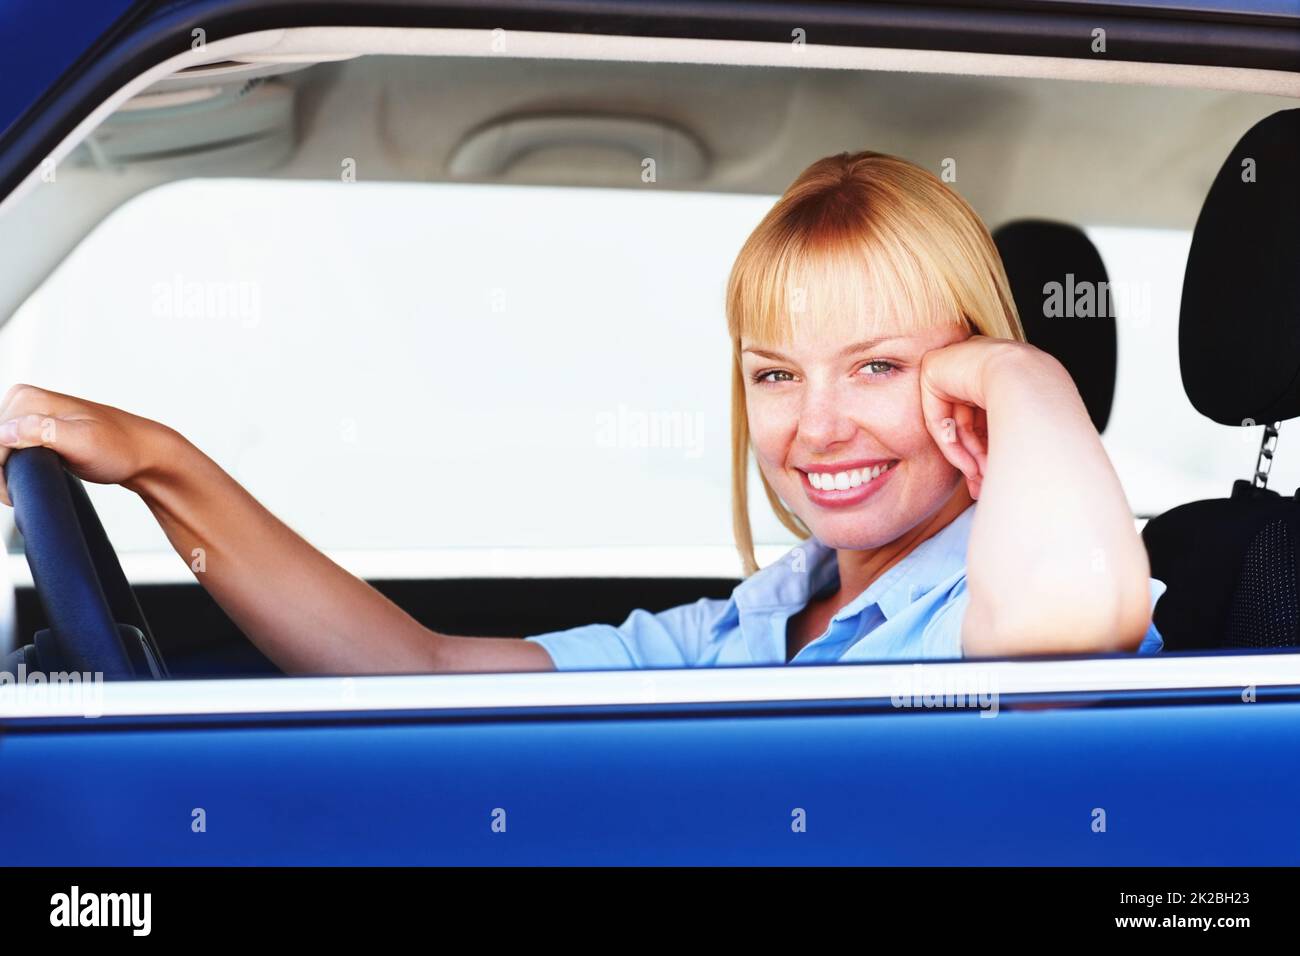 Pretty woman smiling from the drivers seat of a car. Smiling blond woman in a car sitting at the drivers seat. Stock Photo